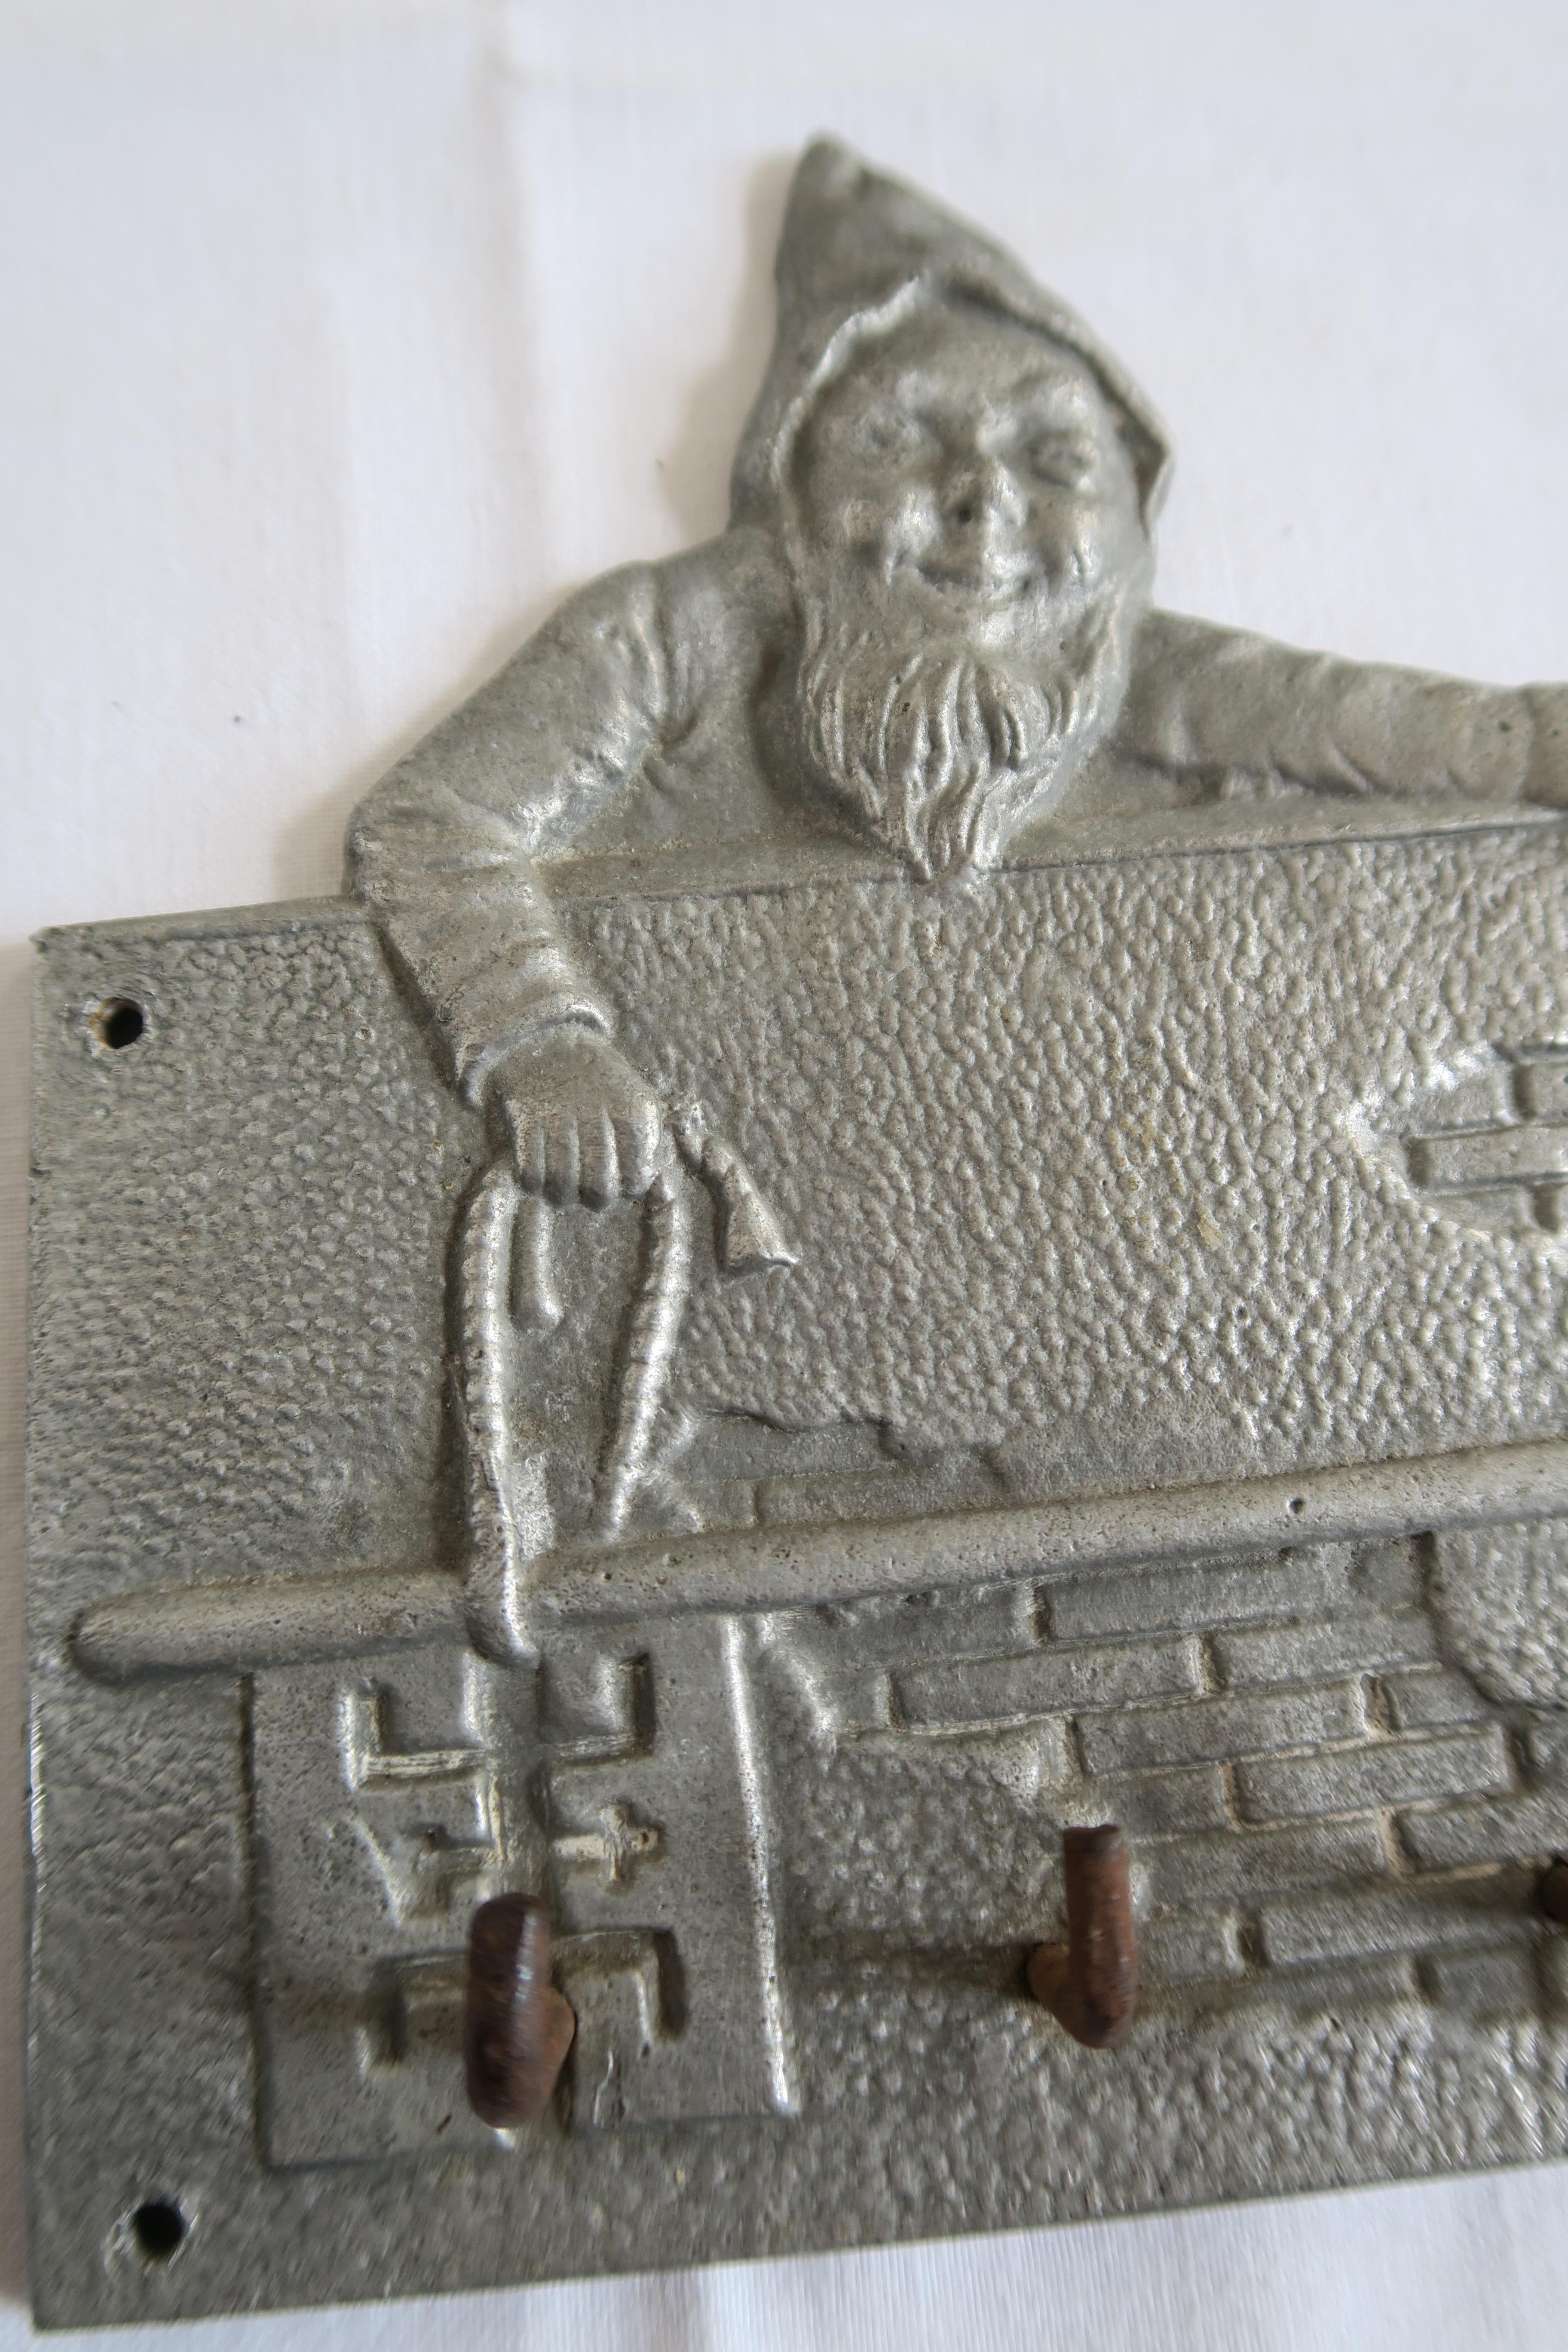 For sale is a unique little keyboard/coat rack featuring two jolly dwarves dutifully guarding your keys. It was handcrafted in the 1930s and is made of solid aluminum-iron alloy. Can be used as a key board for your garden house or, alternatively, it